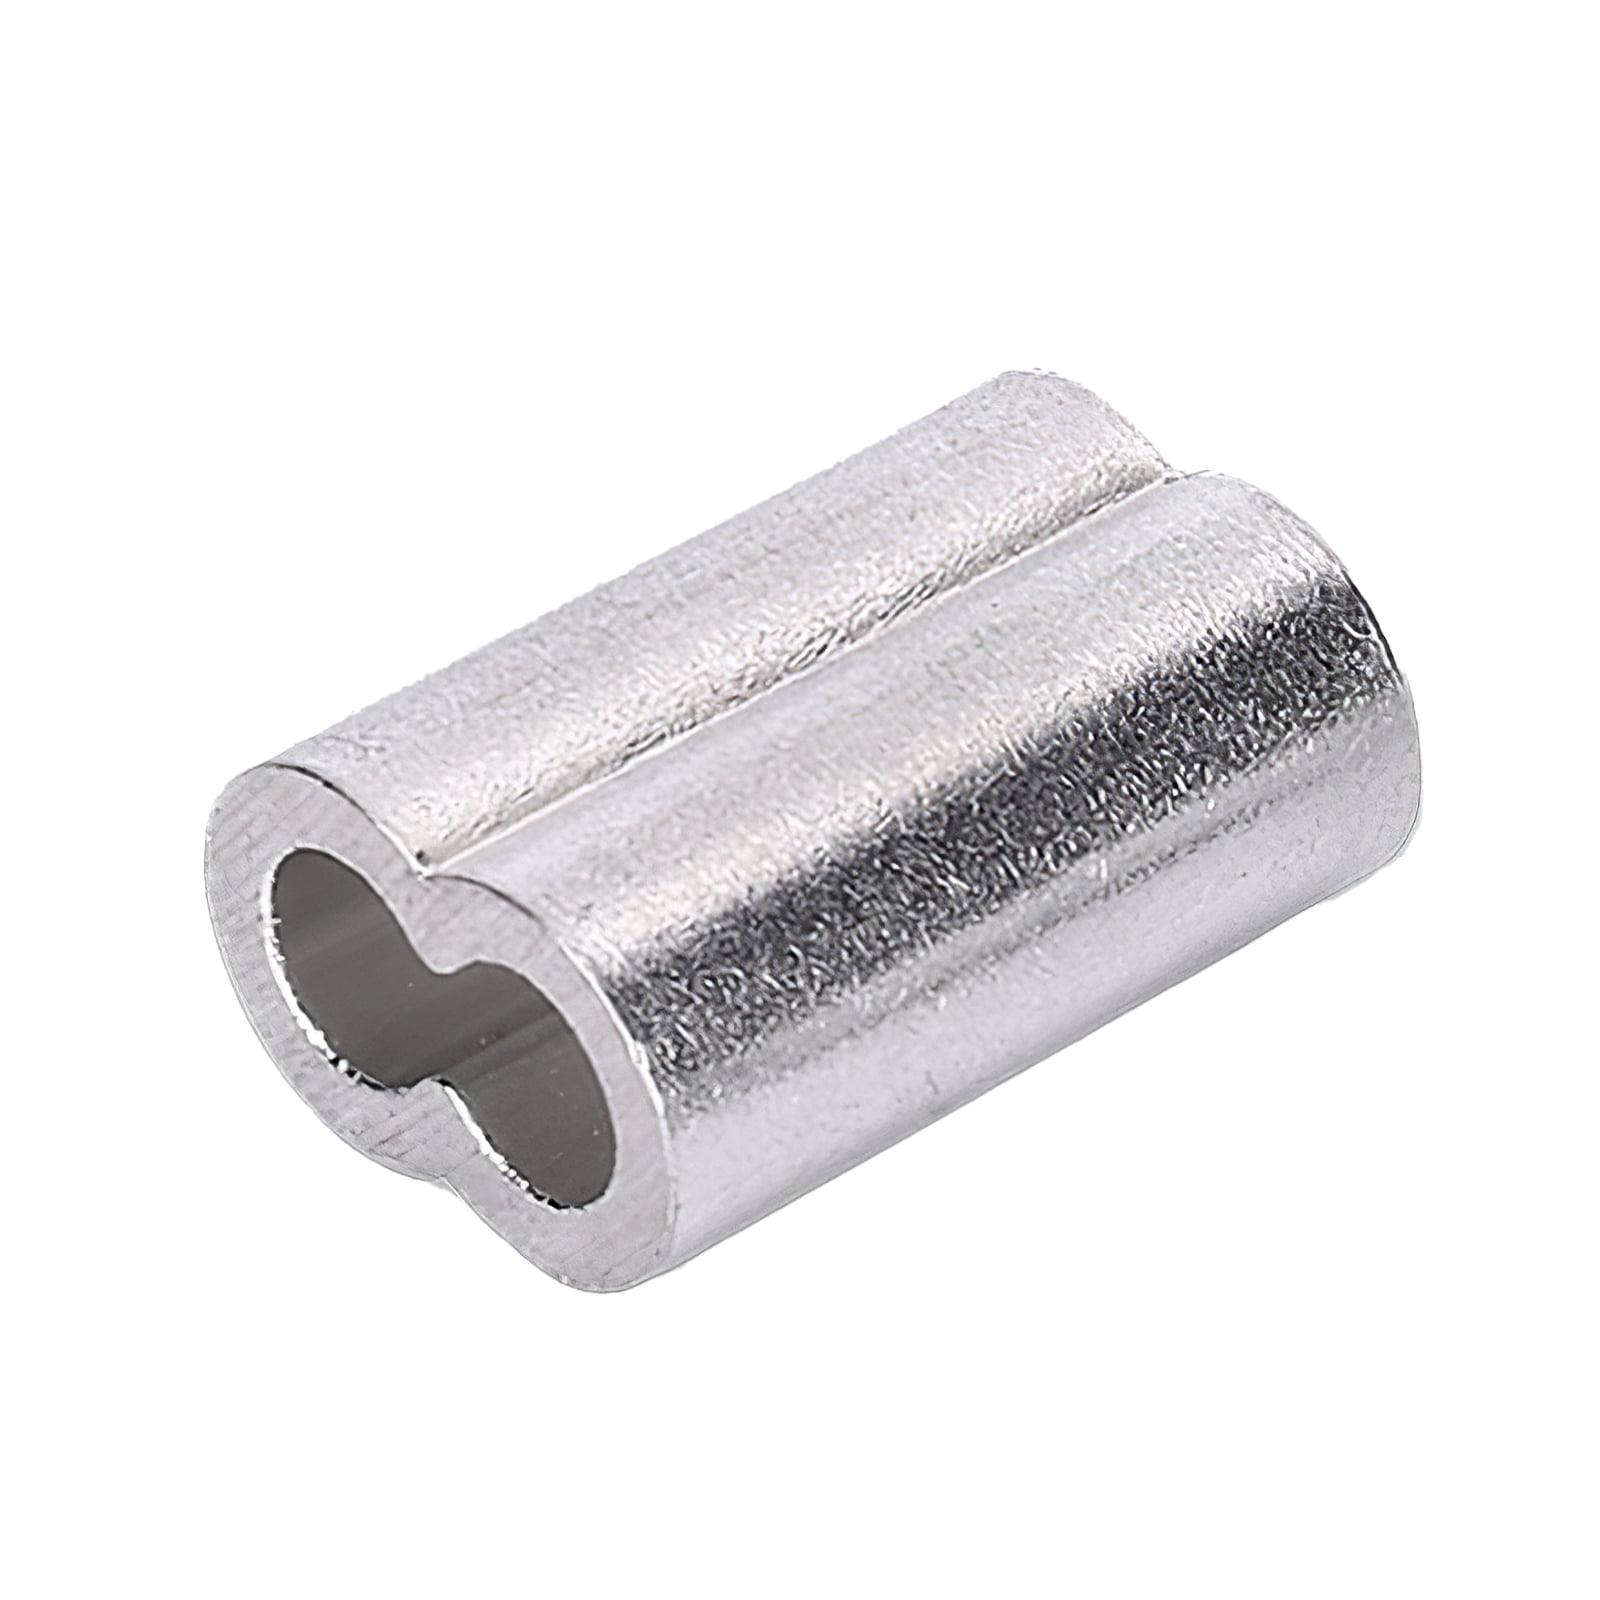 Pack of 200 3mm Aluminum Crimping Loop Sleeve Cable Crimp for 3mm Diameter Double Ferrule Wire Rope and Cable 